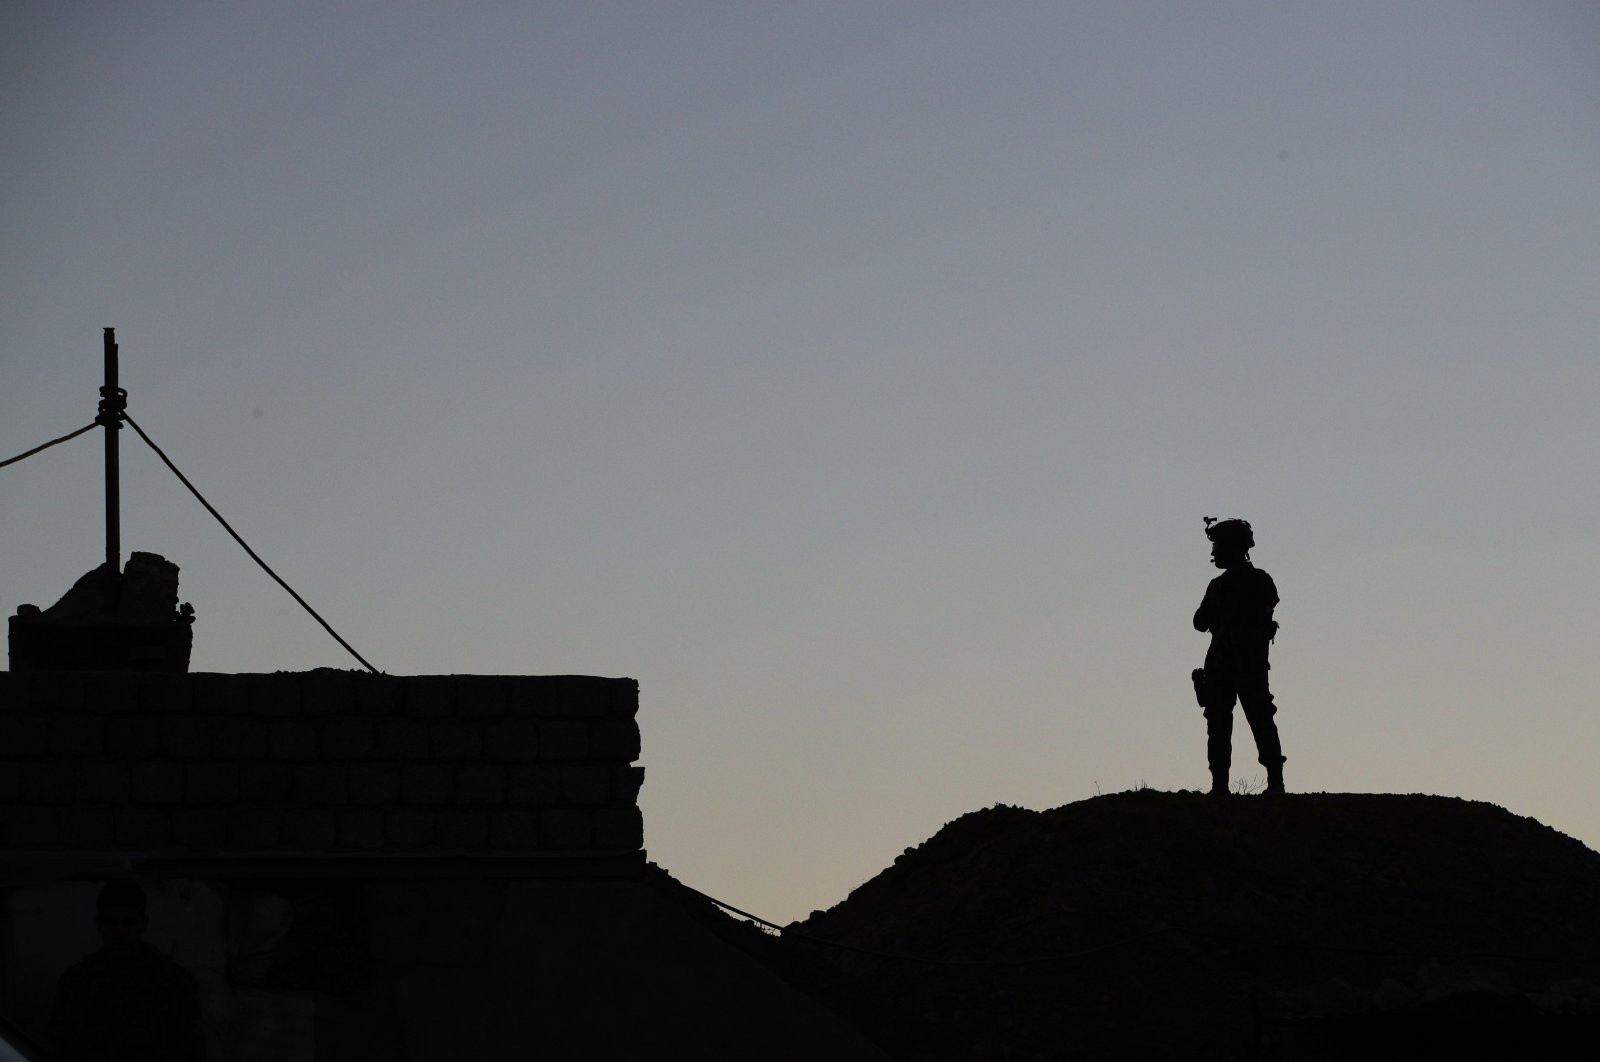 A Kurdish Peshmerga soldier is silhouetted near a military outpost on the outskirts of the city of Mosul, Iraq, Jan. 2, 2017. (AP File Photo)